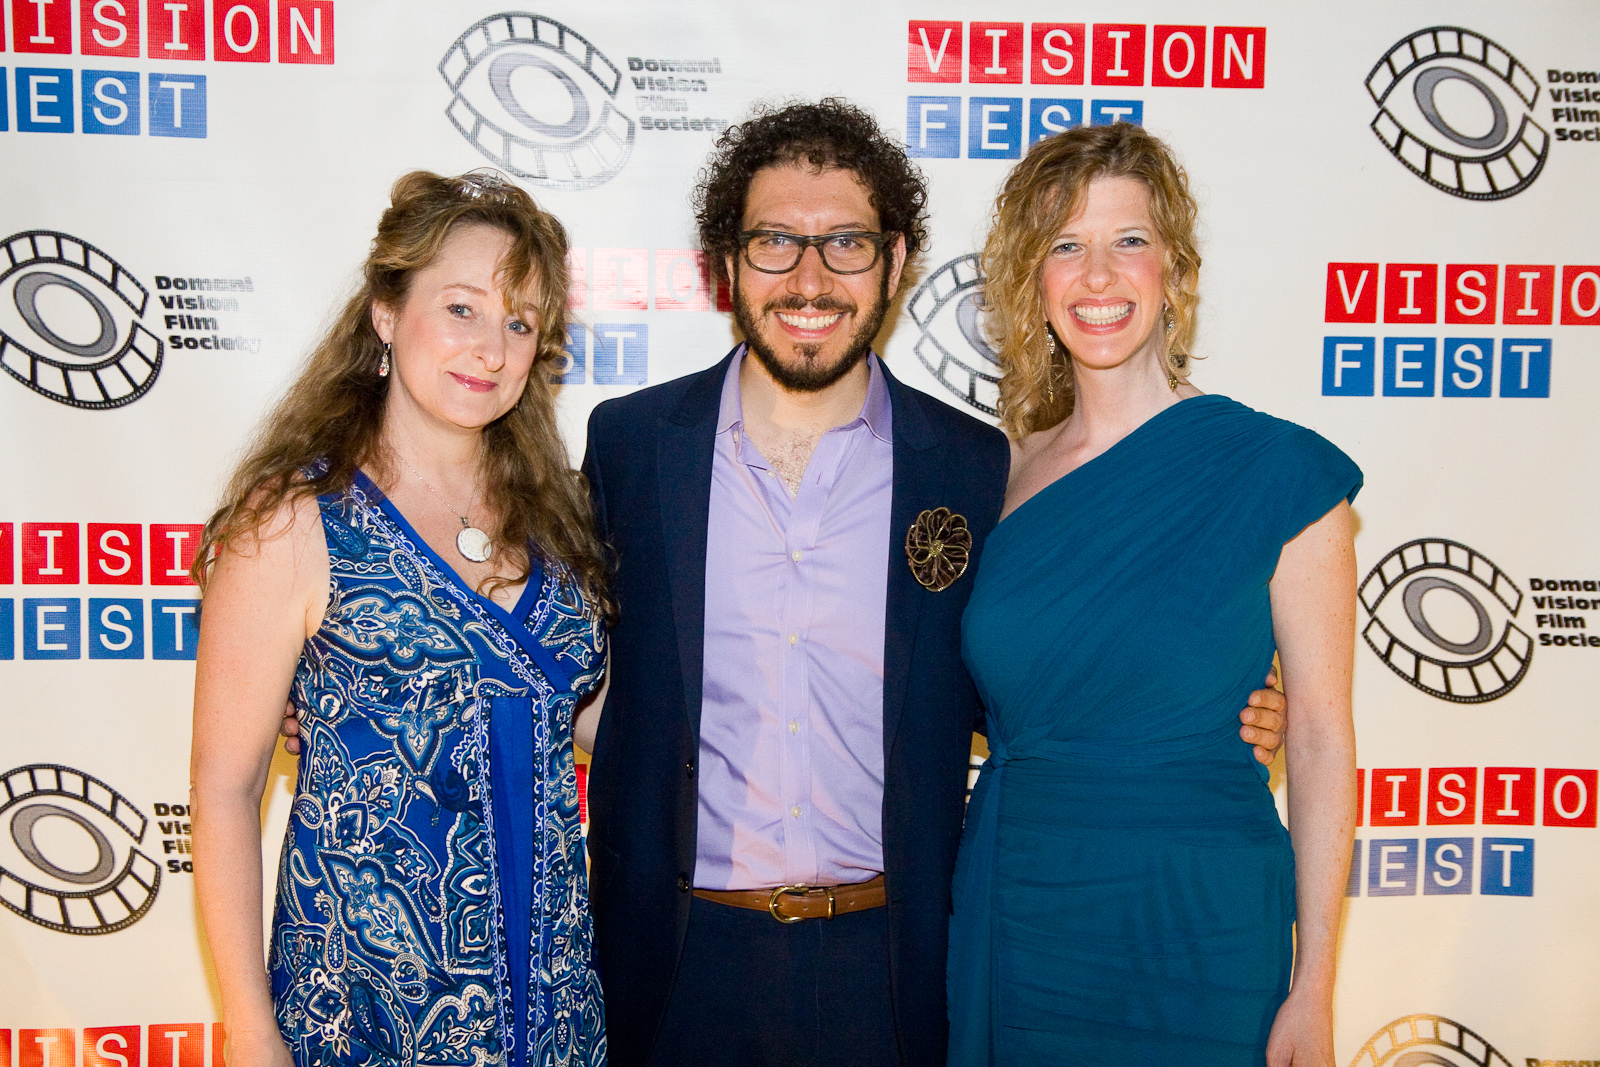 (Left to Right) Writer Lori Fischer, Director/Producer Sean Gannet, and Actor/Producer Ashley Wren Collins at VisionFEST 14 for the premiere of Chasing Taste.